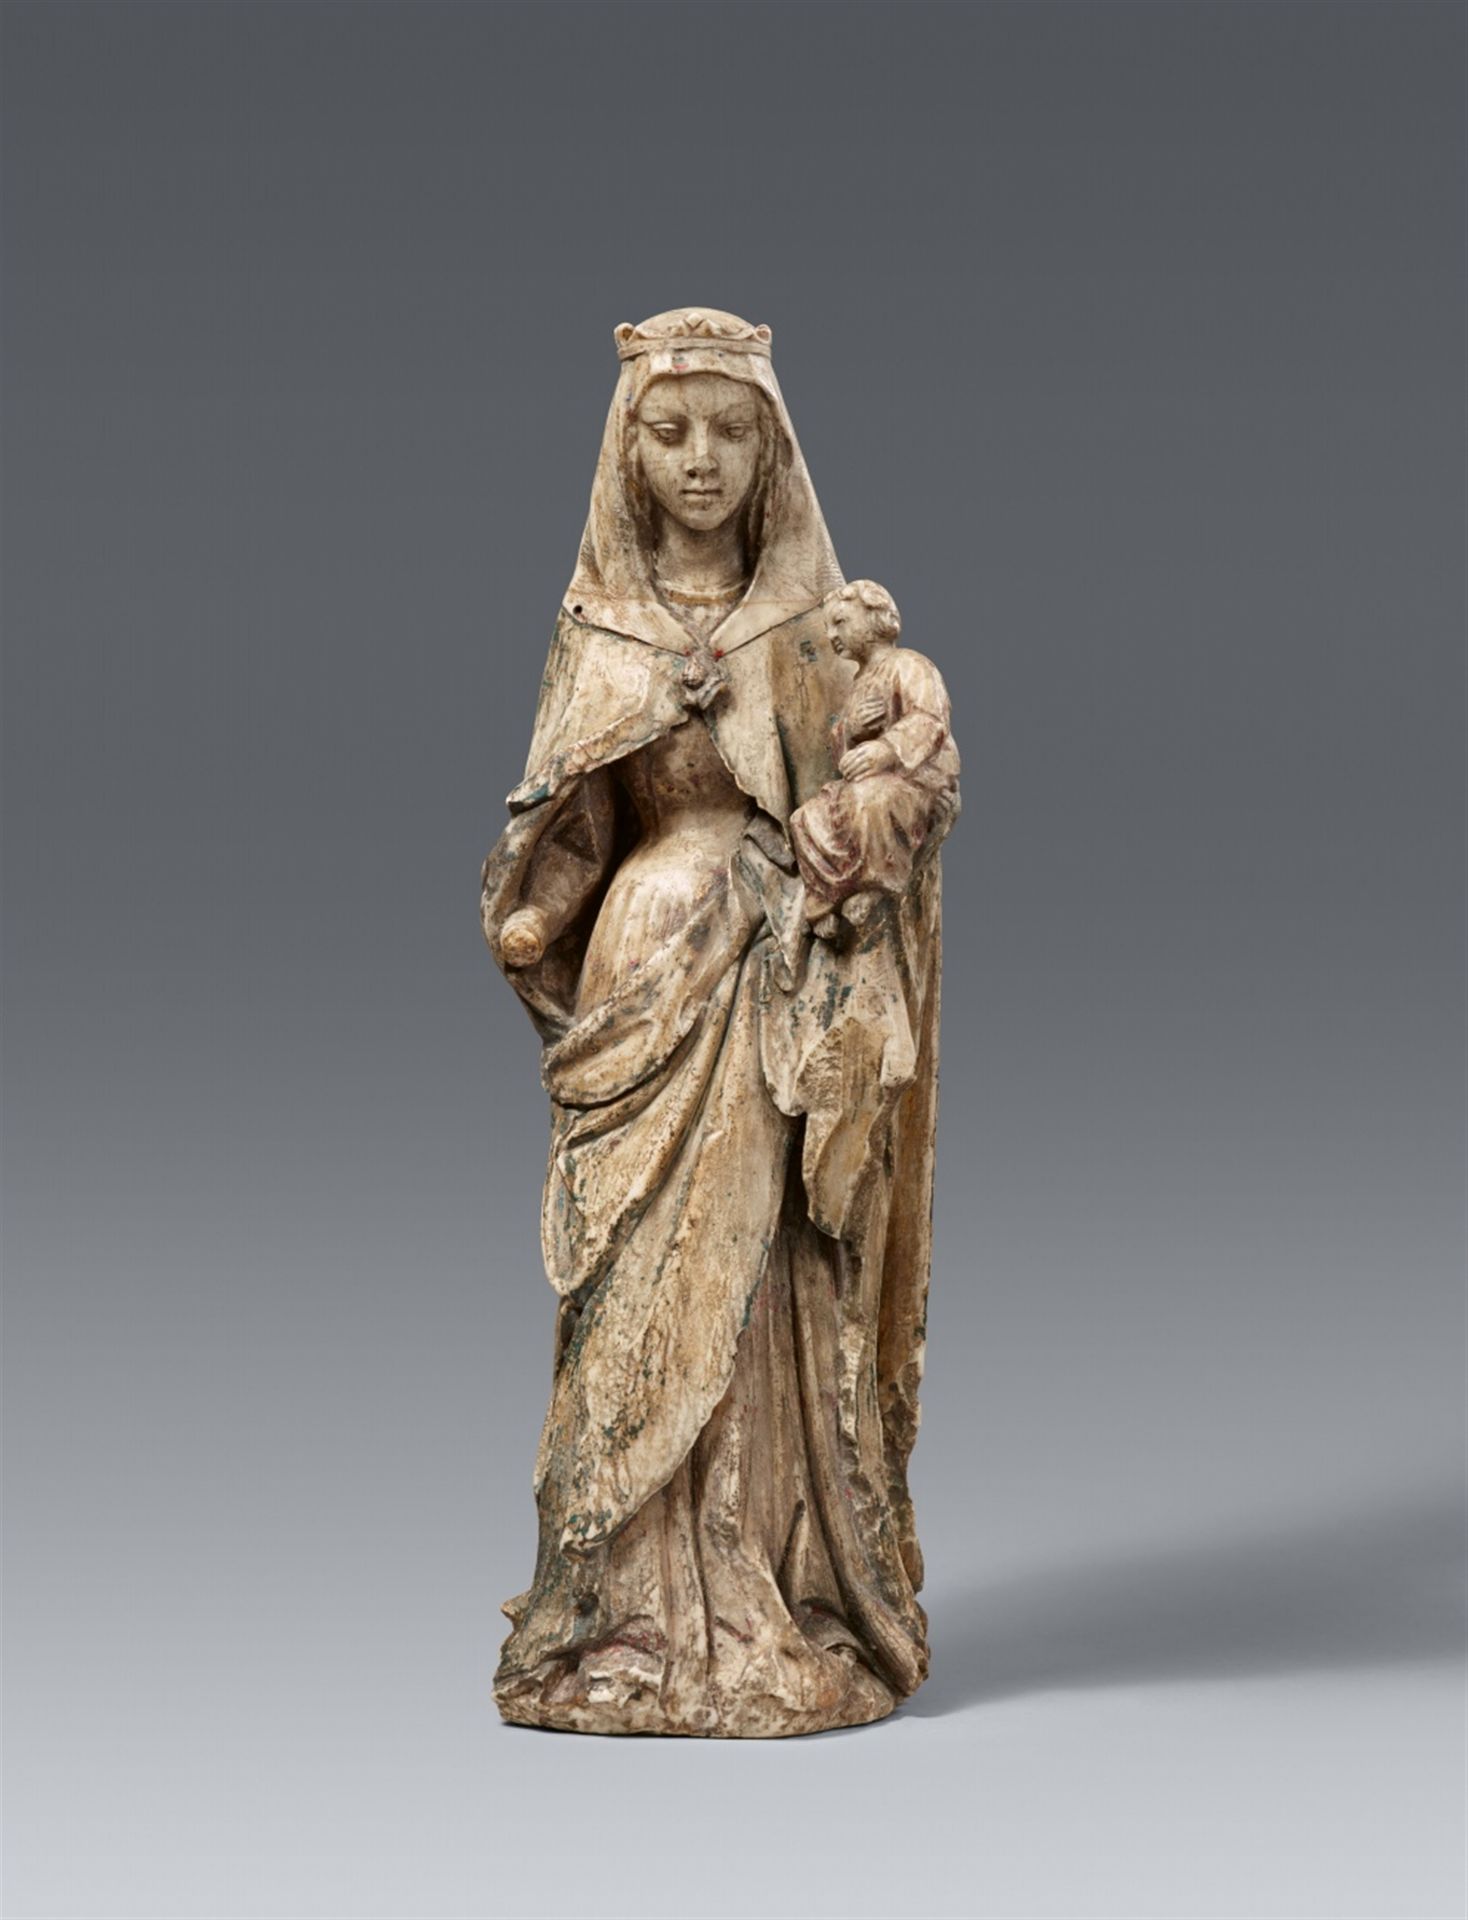 A 15th century Ibero-Flemish carved alabaster figure of the Virgin and Child